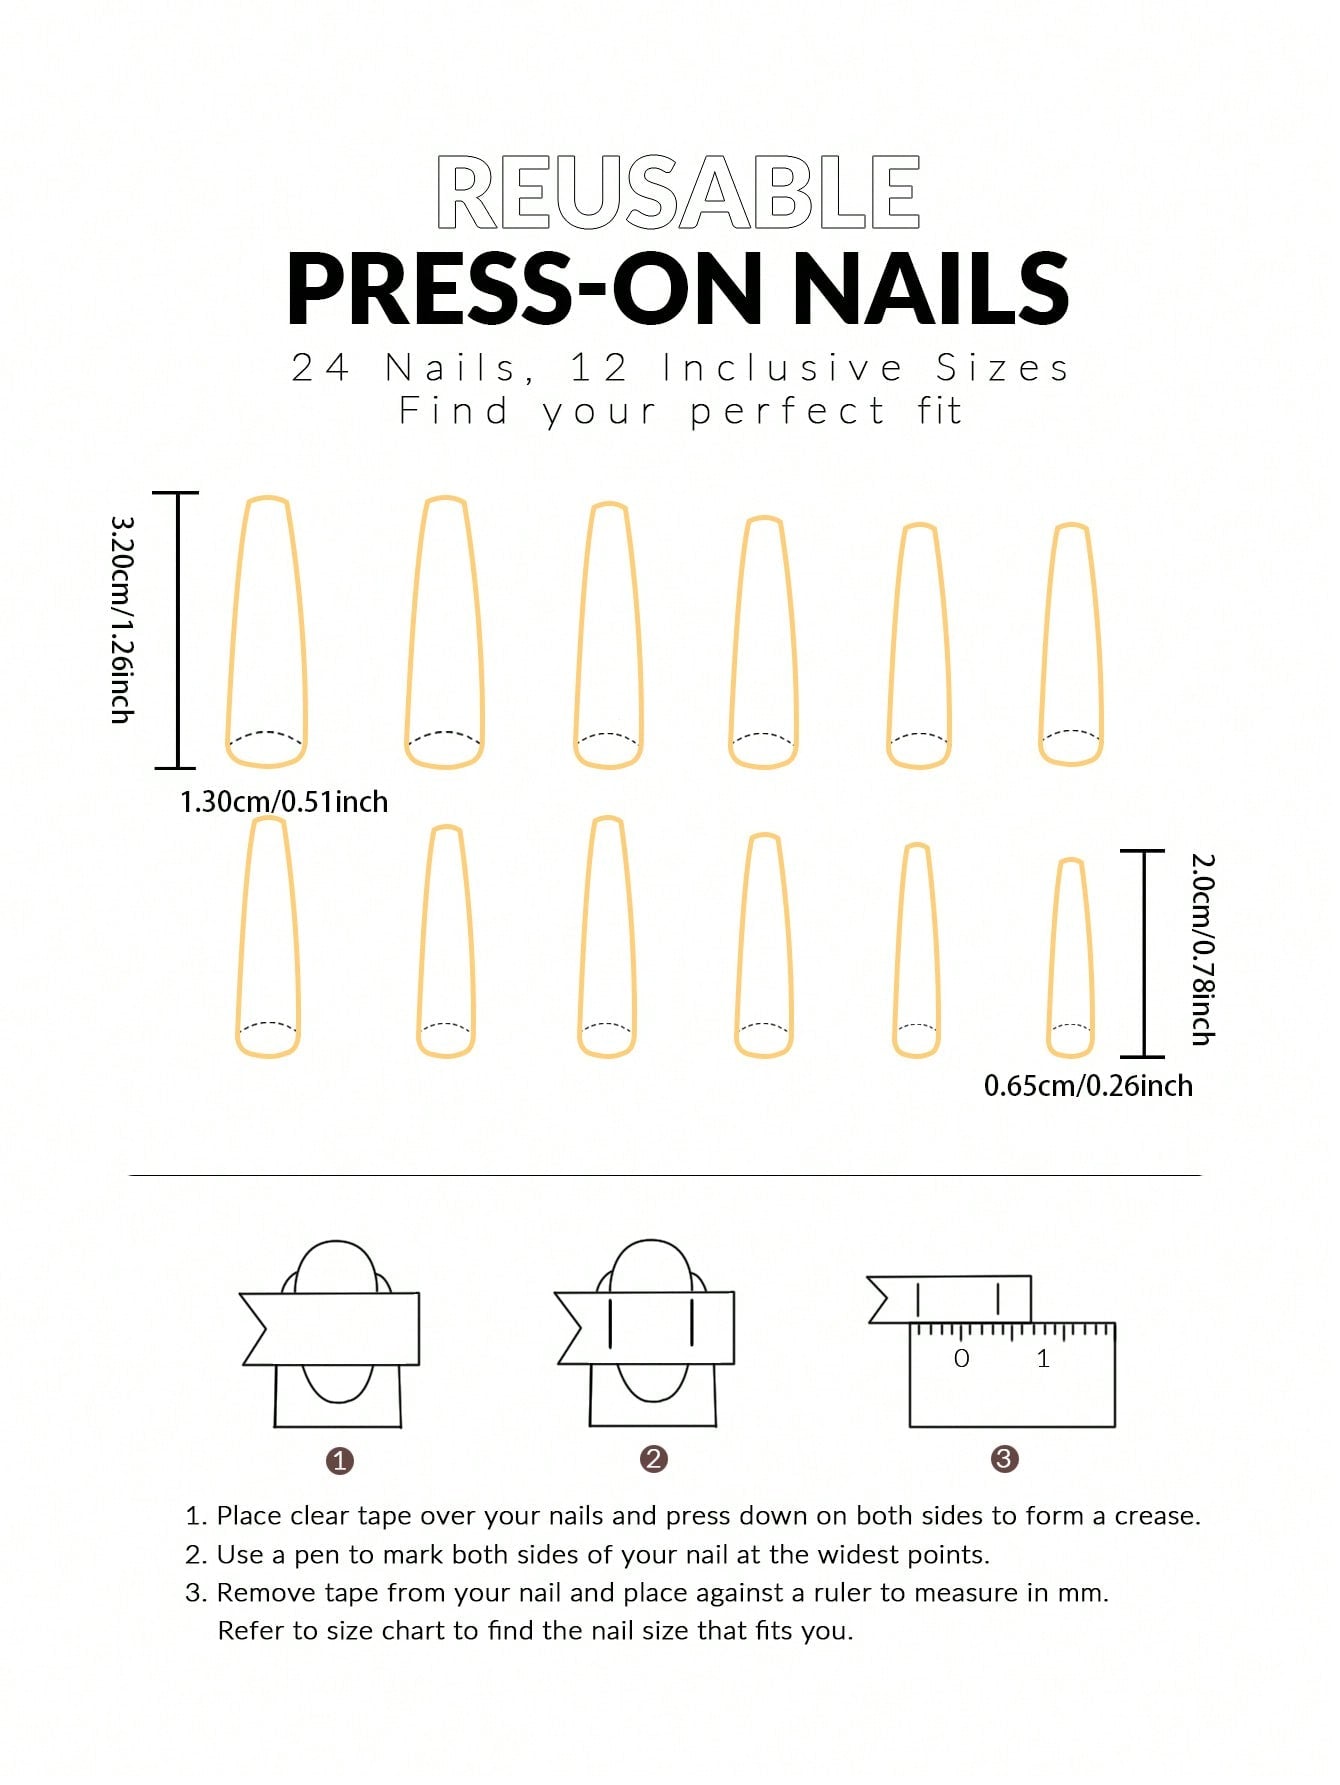 French Nails Bling Butterfly Nails Press-on Nails